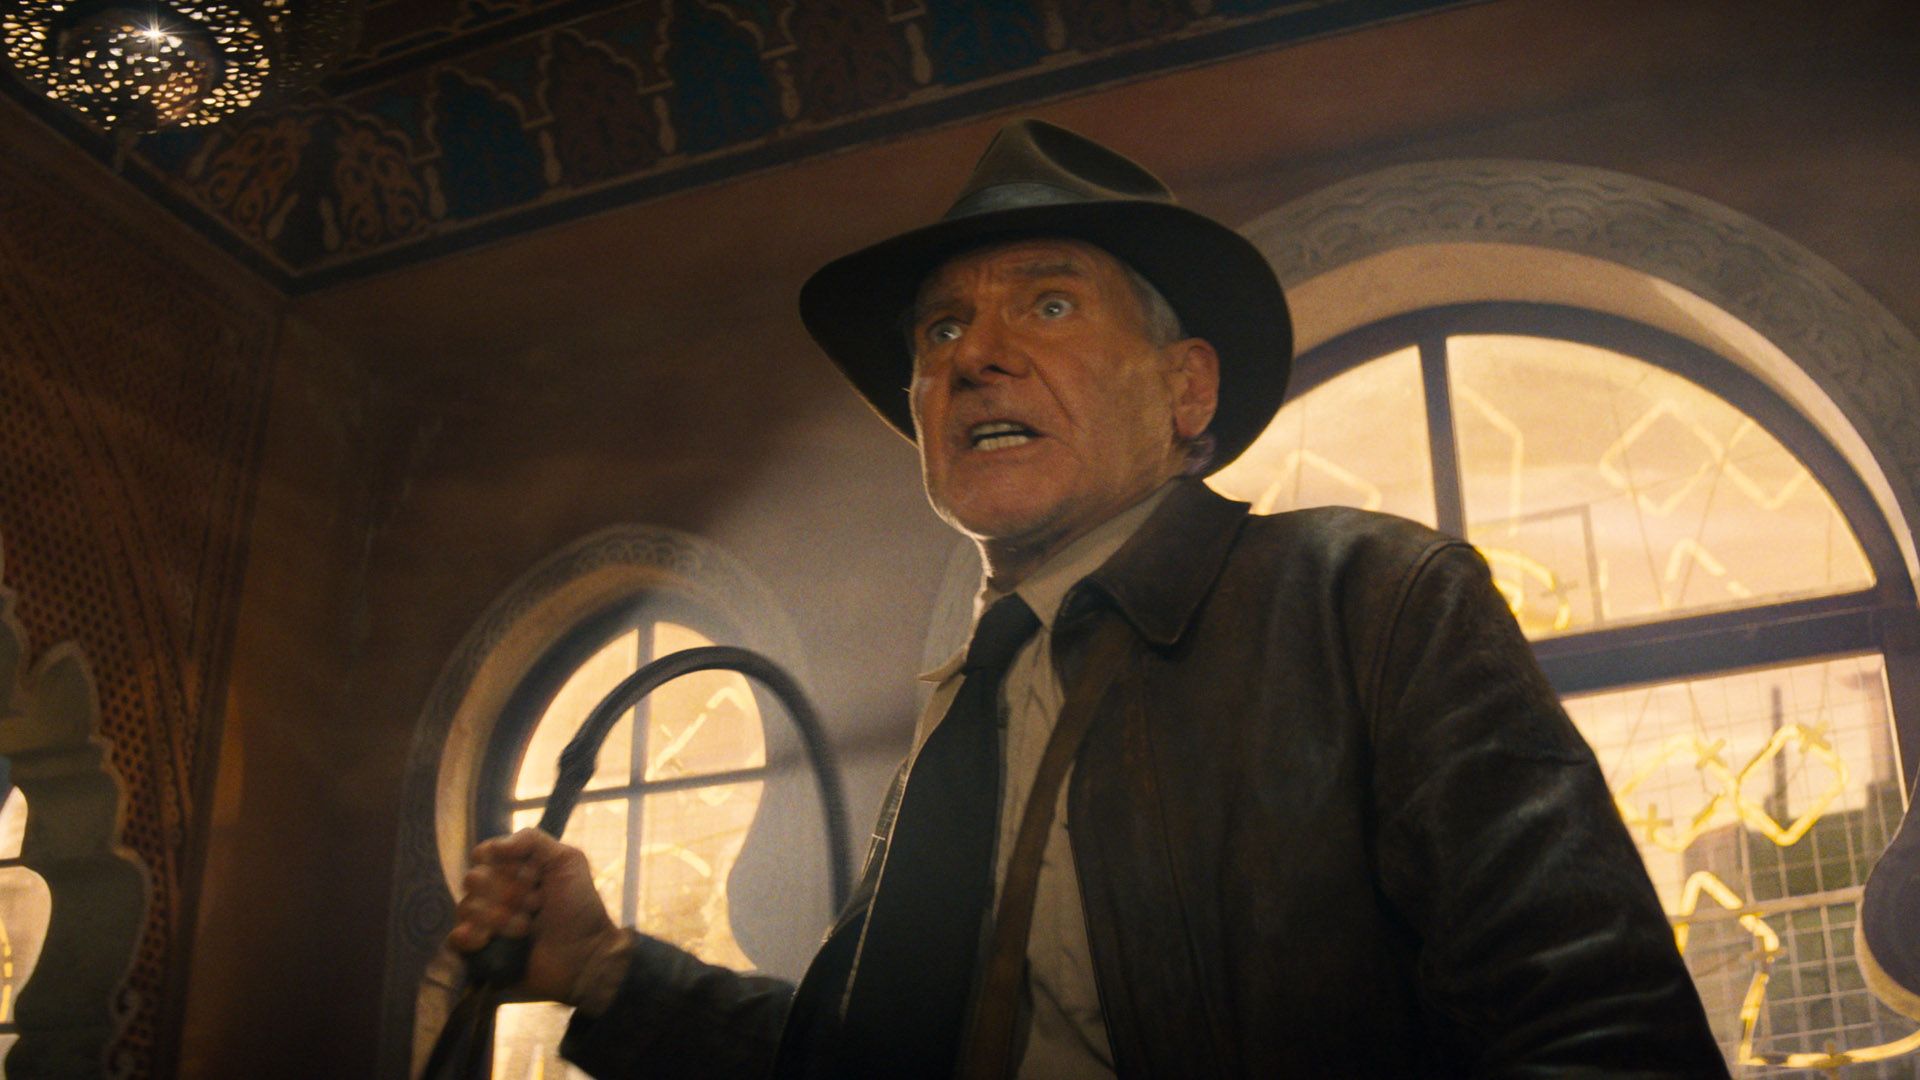 Indiana Jones 5 trailer goes back to the series' roots and I couldn't